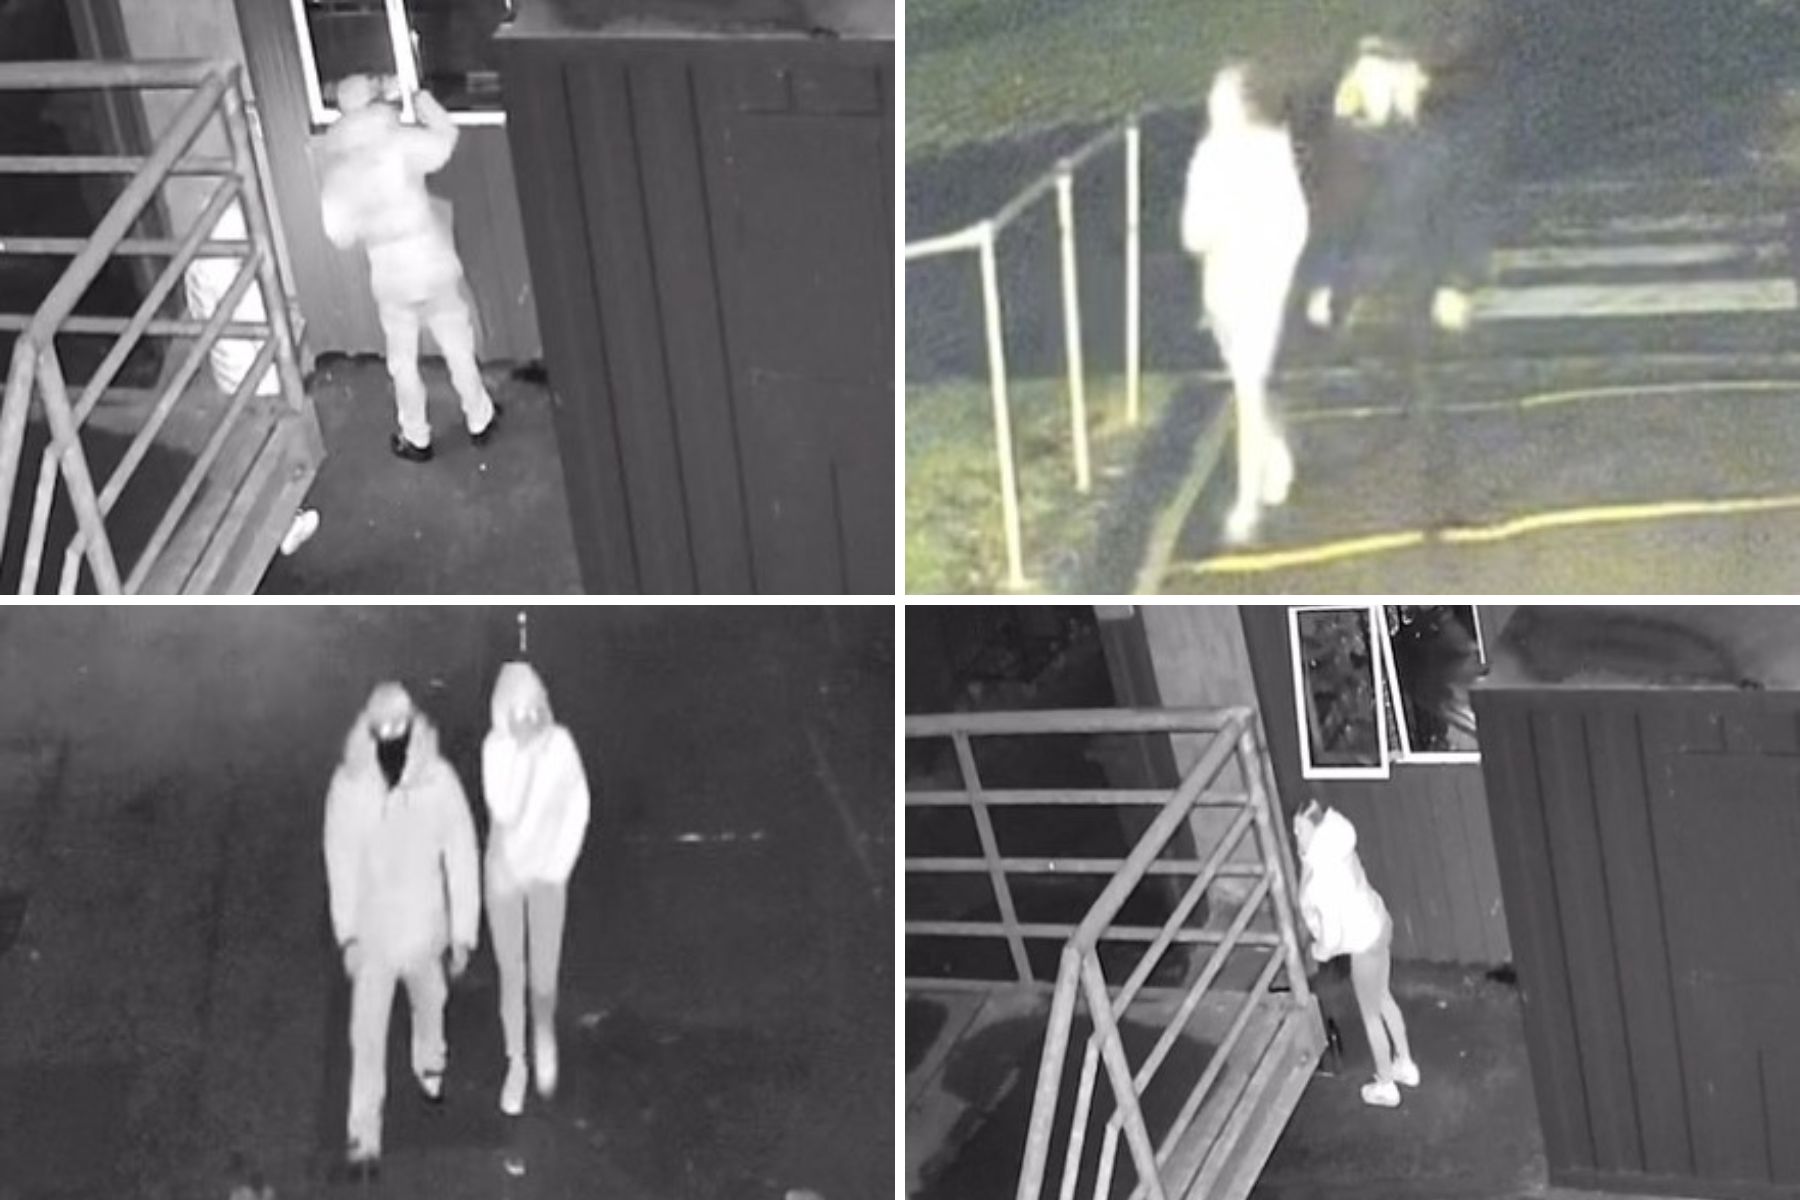 Yeovil Town FC released CCTV images from Huish Park